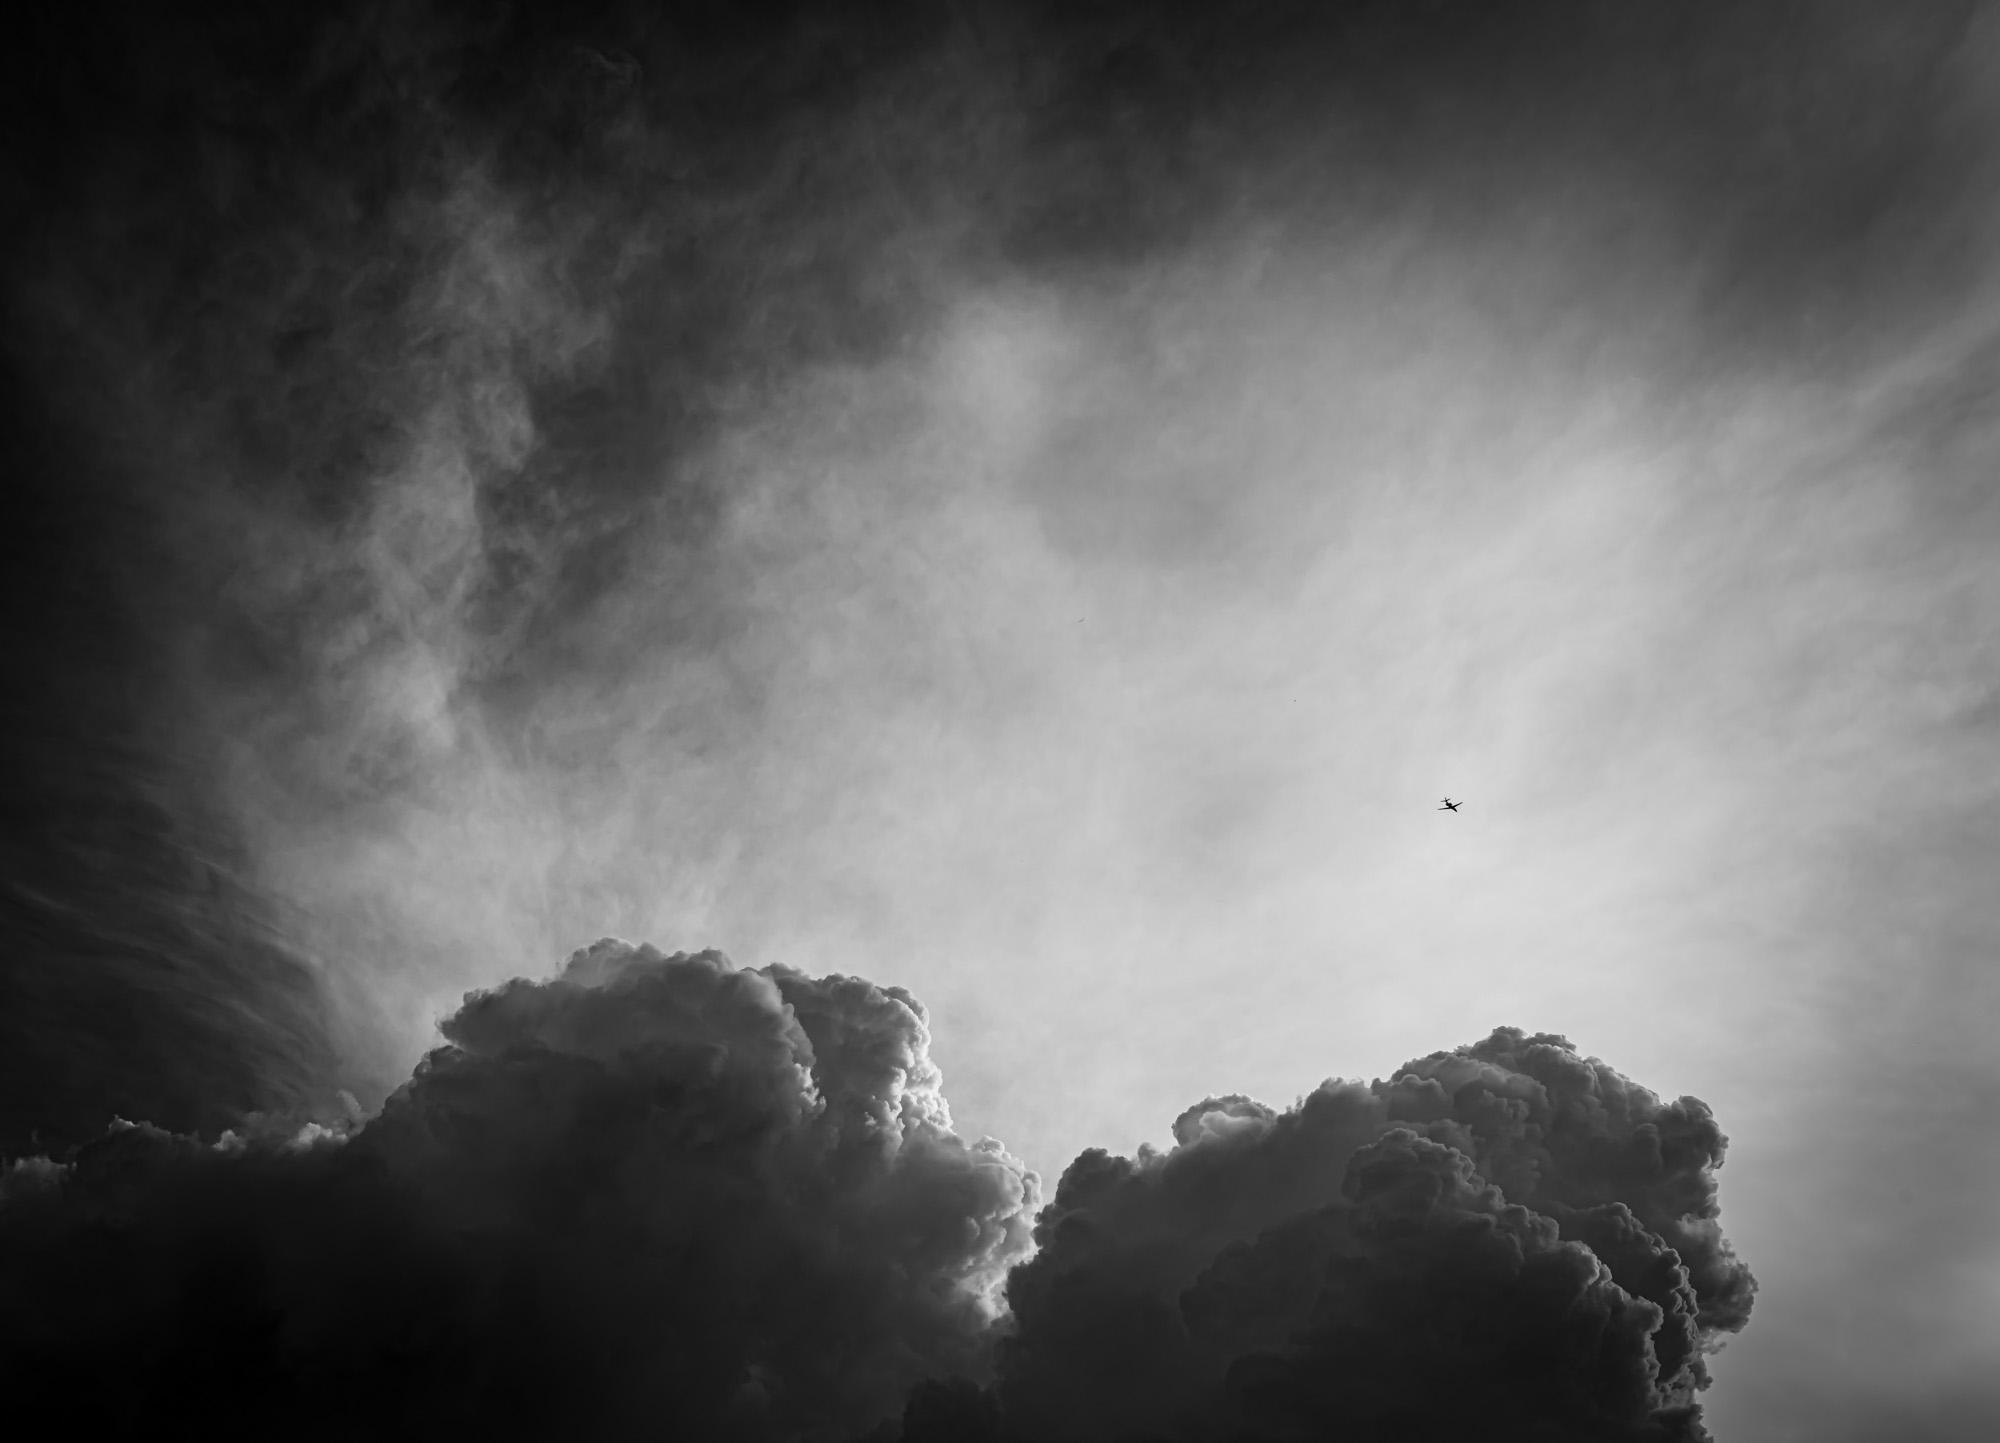 Limited Edition Black and White Photograph "Flying Above the Clouds". Archival pigment print. Dramatic skies over New York.

About:
Lewis’ artistic practice often explores science, engineering, technology, and innovation. His intention is to create